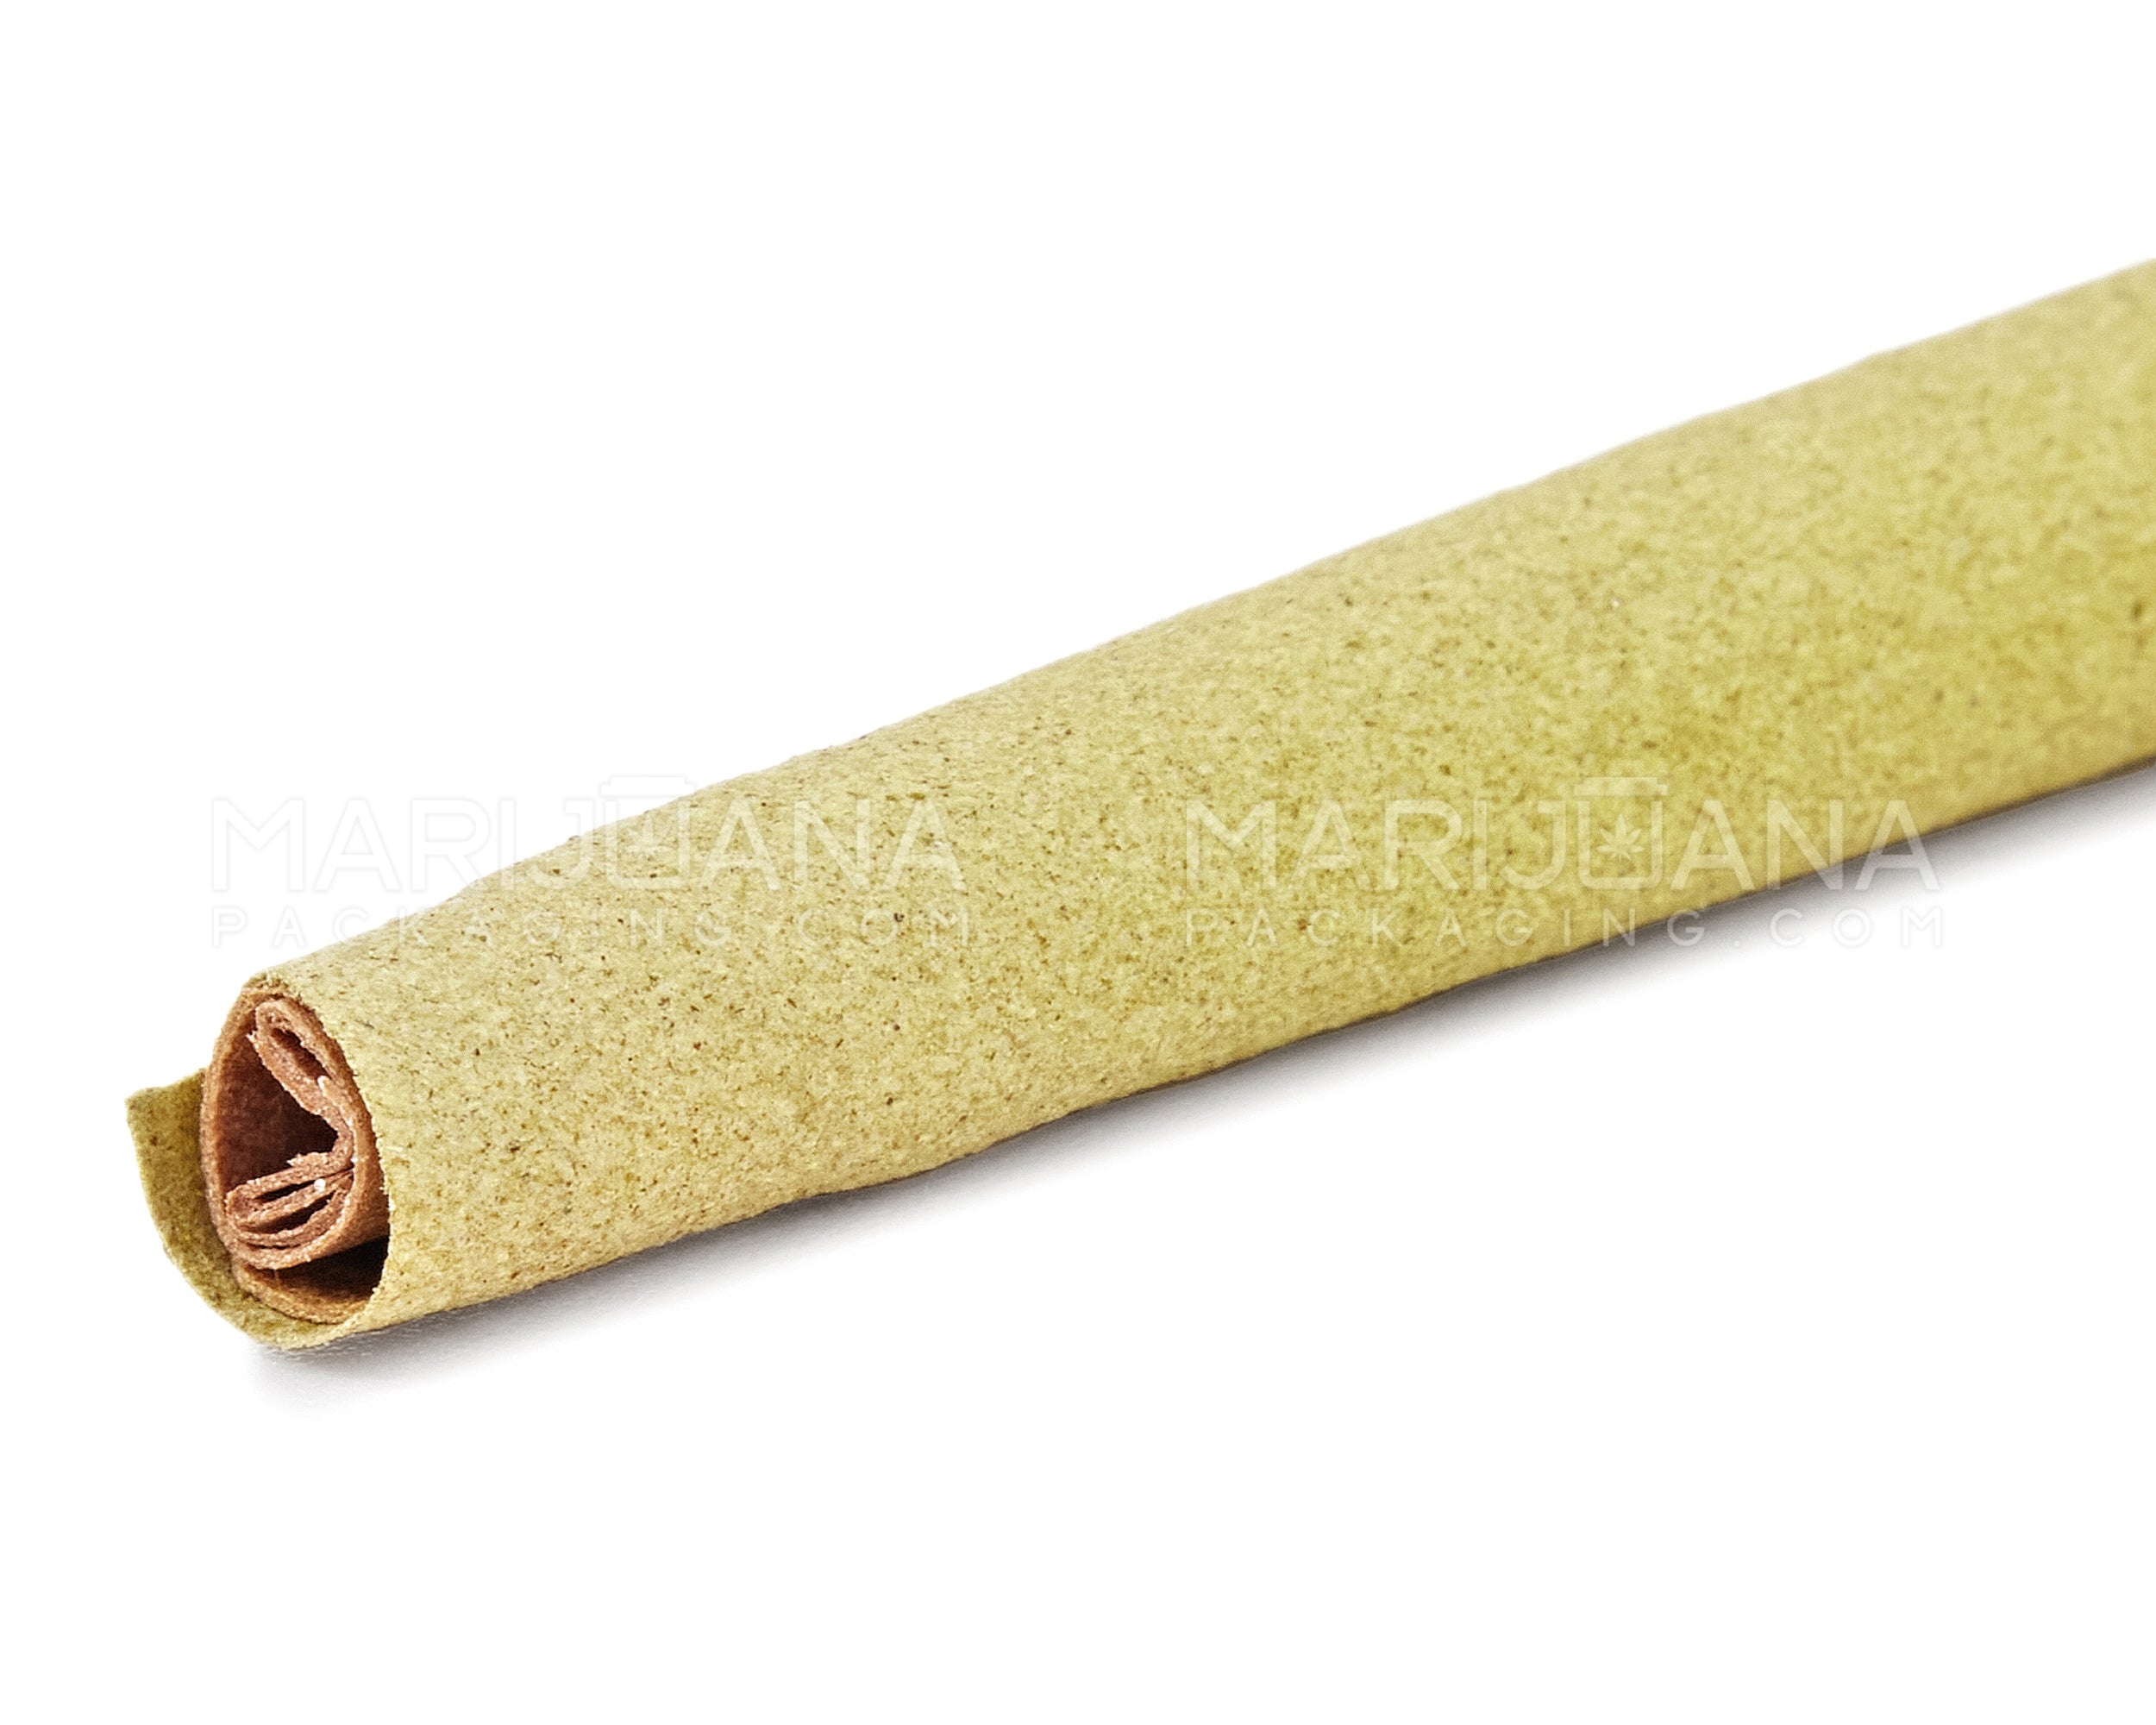 KUSH | 'Retail Display' Terpene Infused Herbal Conical Wraps | 160mm - Pink Cookies - 12 Count - 8